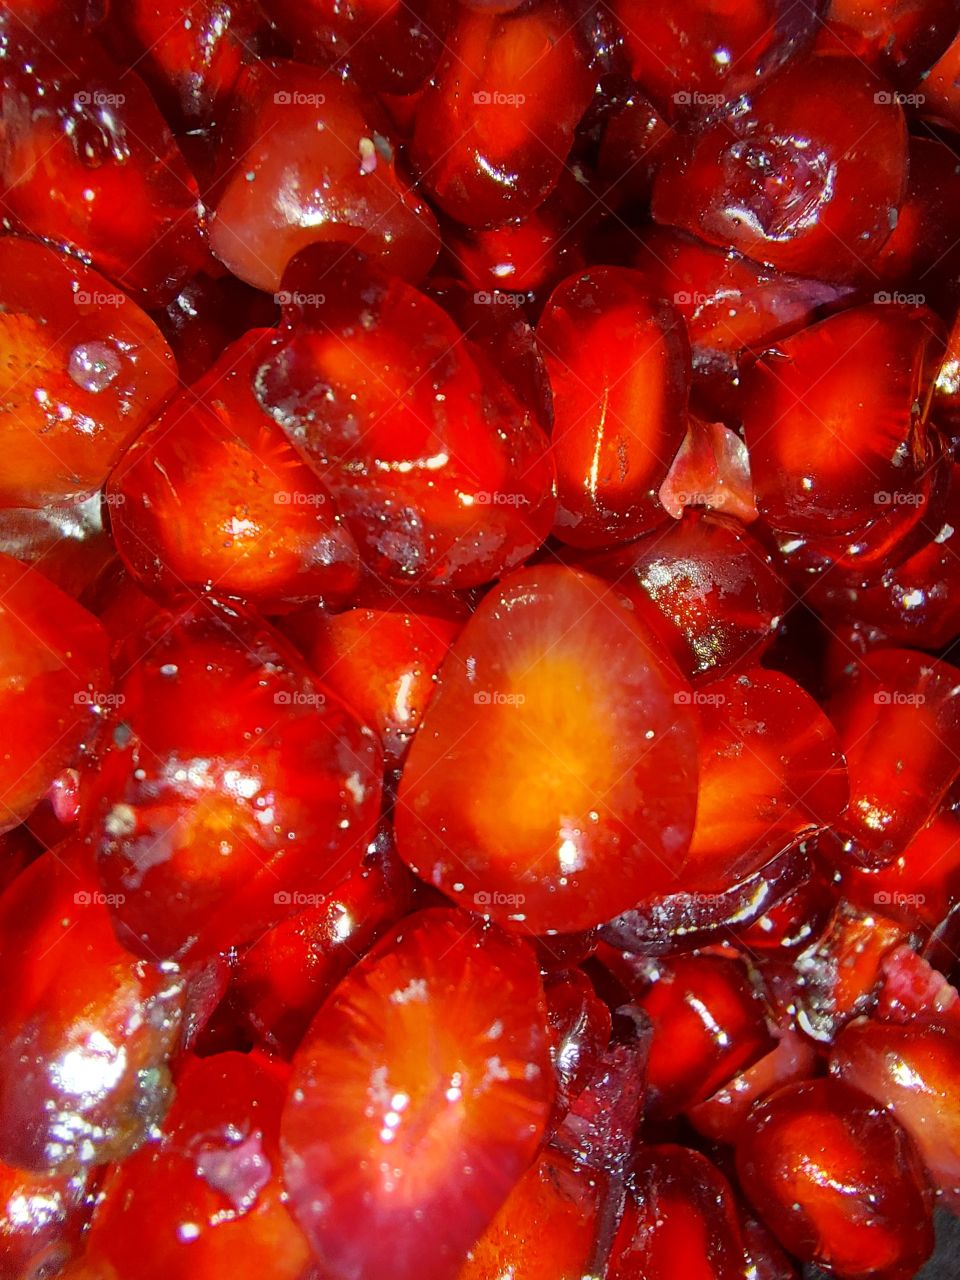 inner view of pomegranate